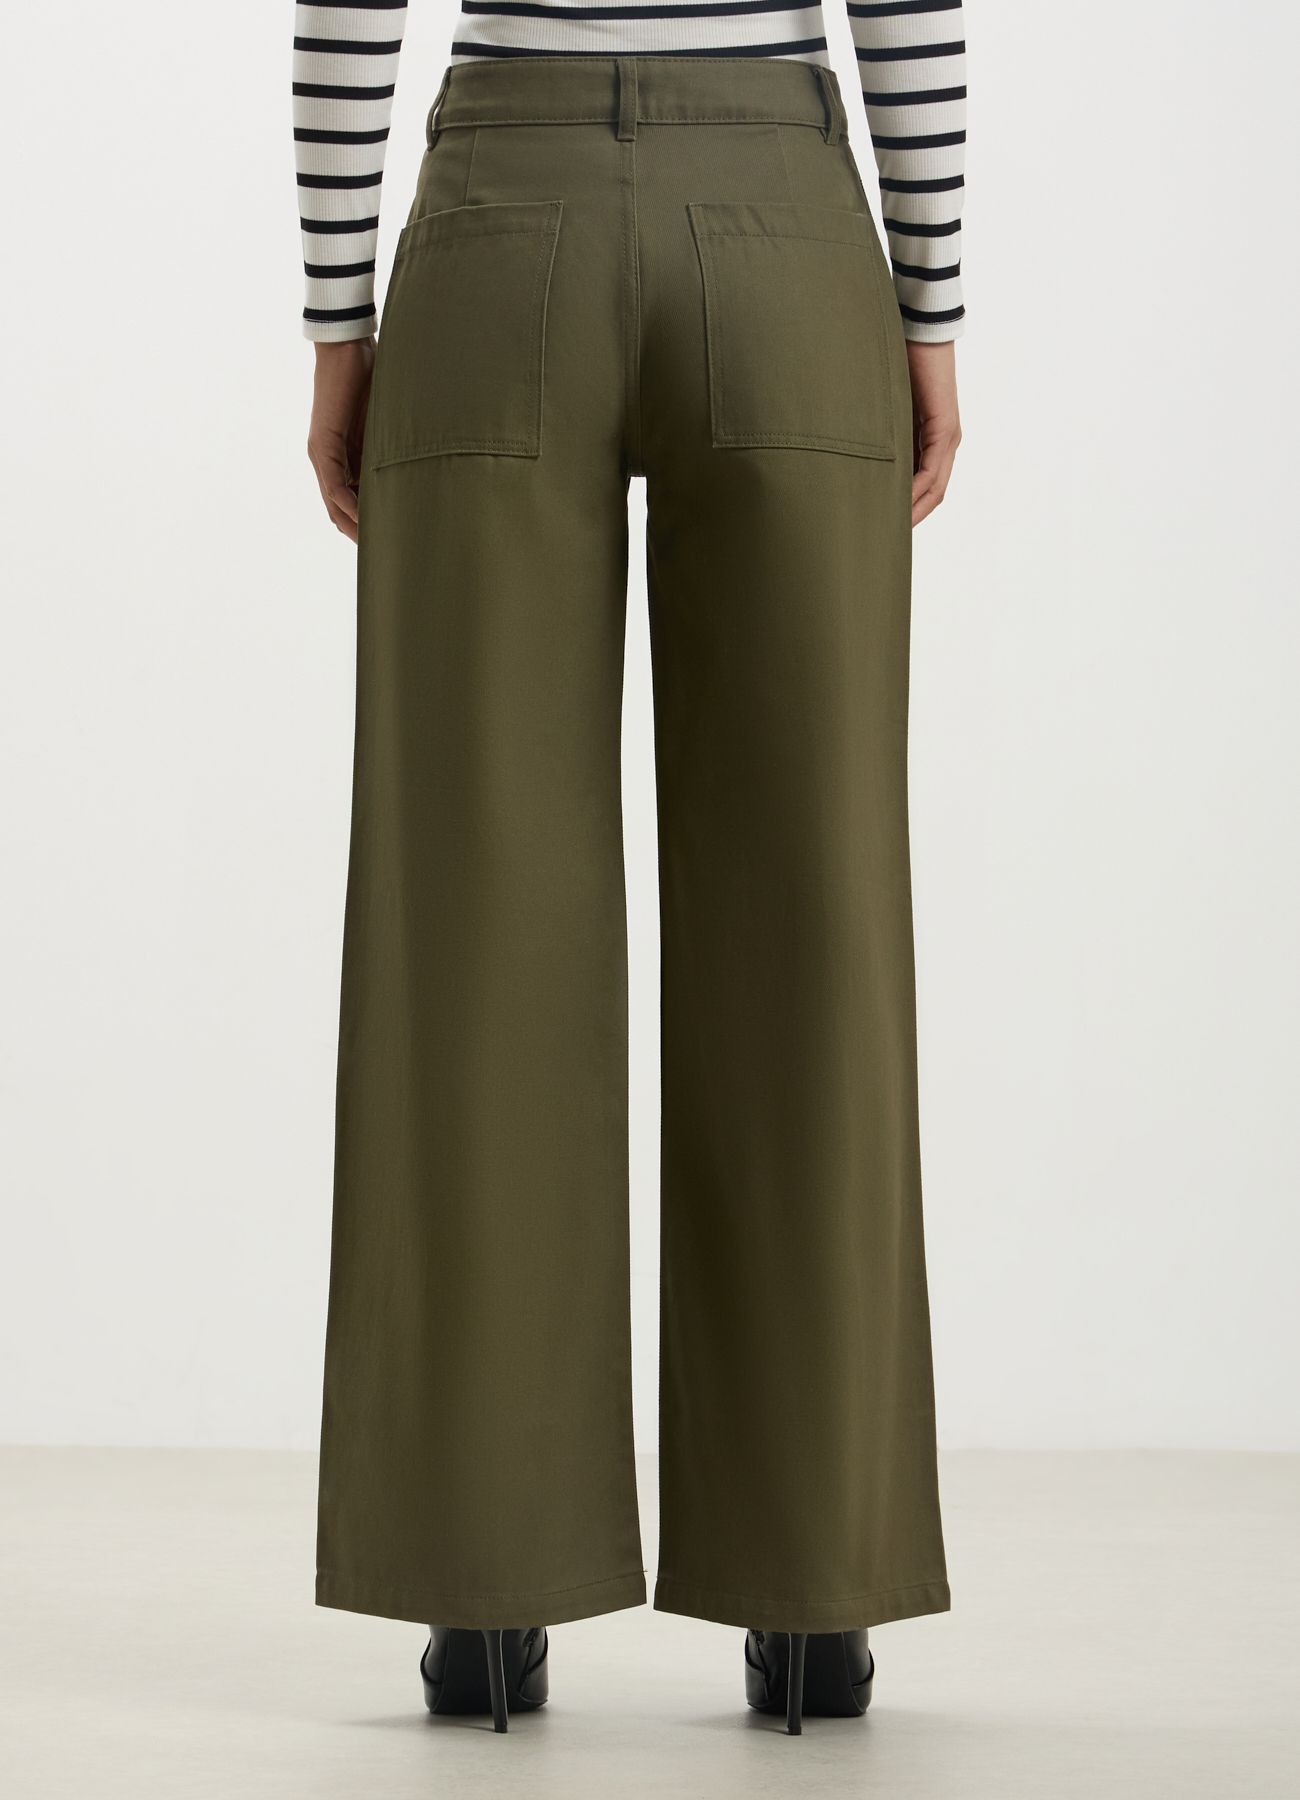 Long trousers solid-colour green military